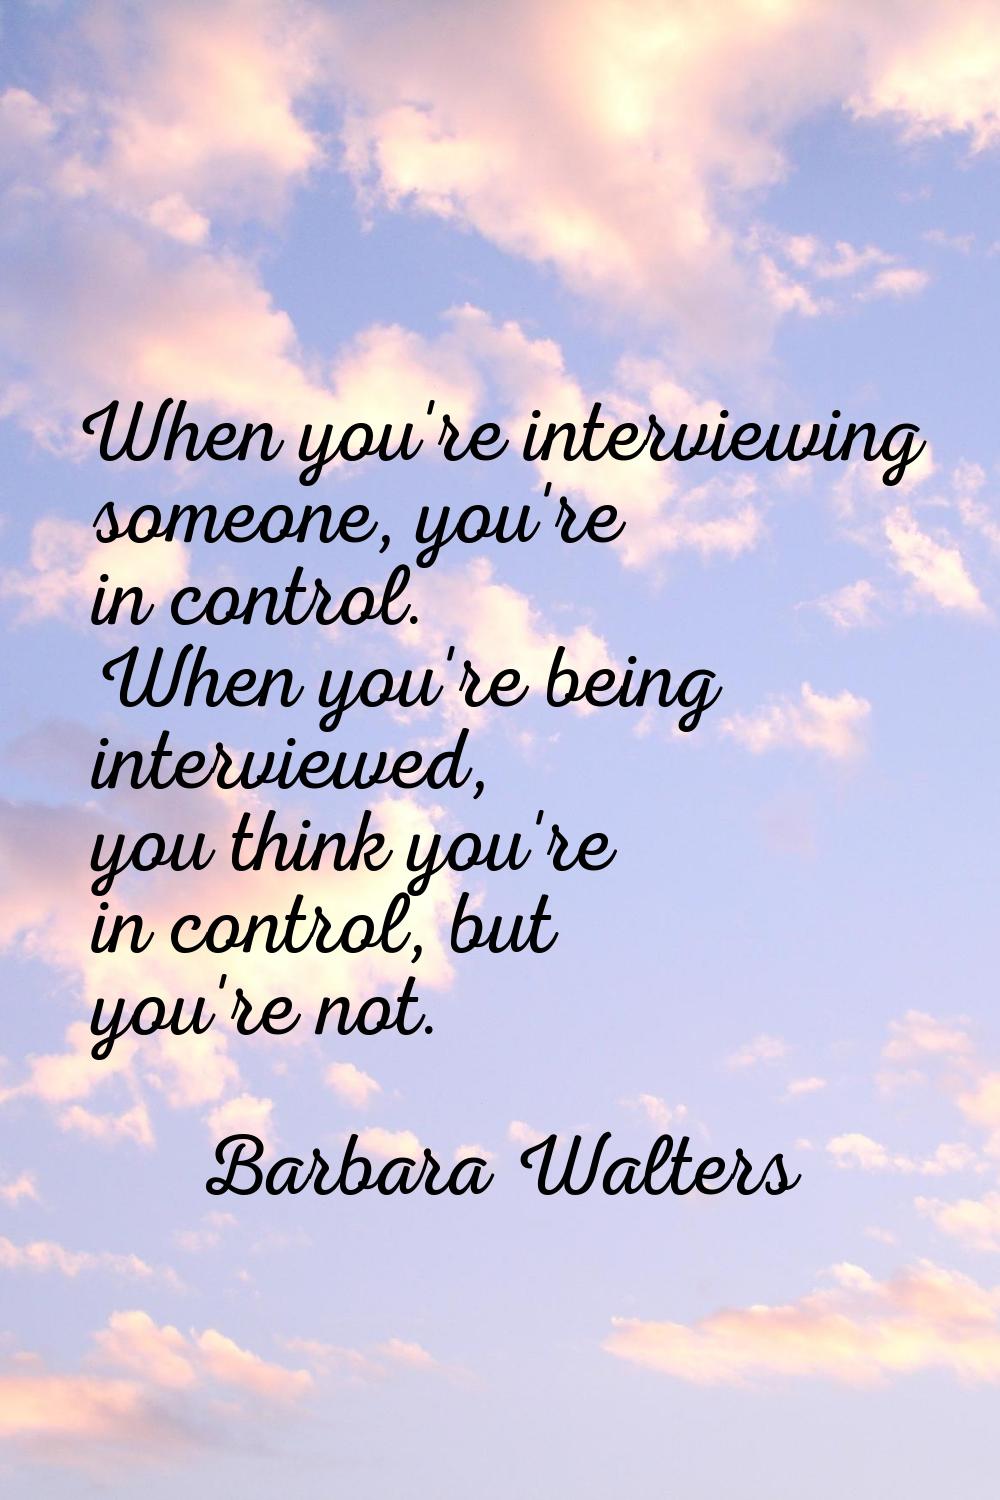 When you're interviewing someone, you're in control. When you're being interviewed, you think you'r